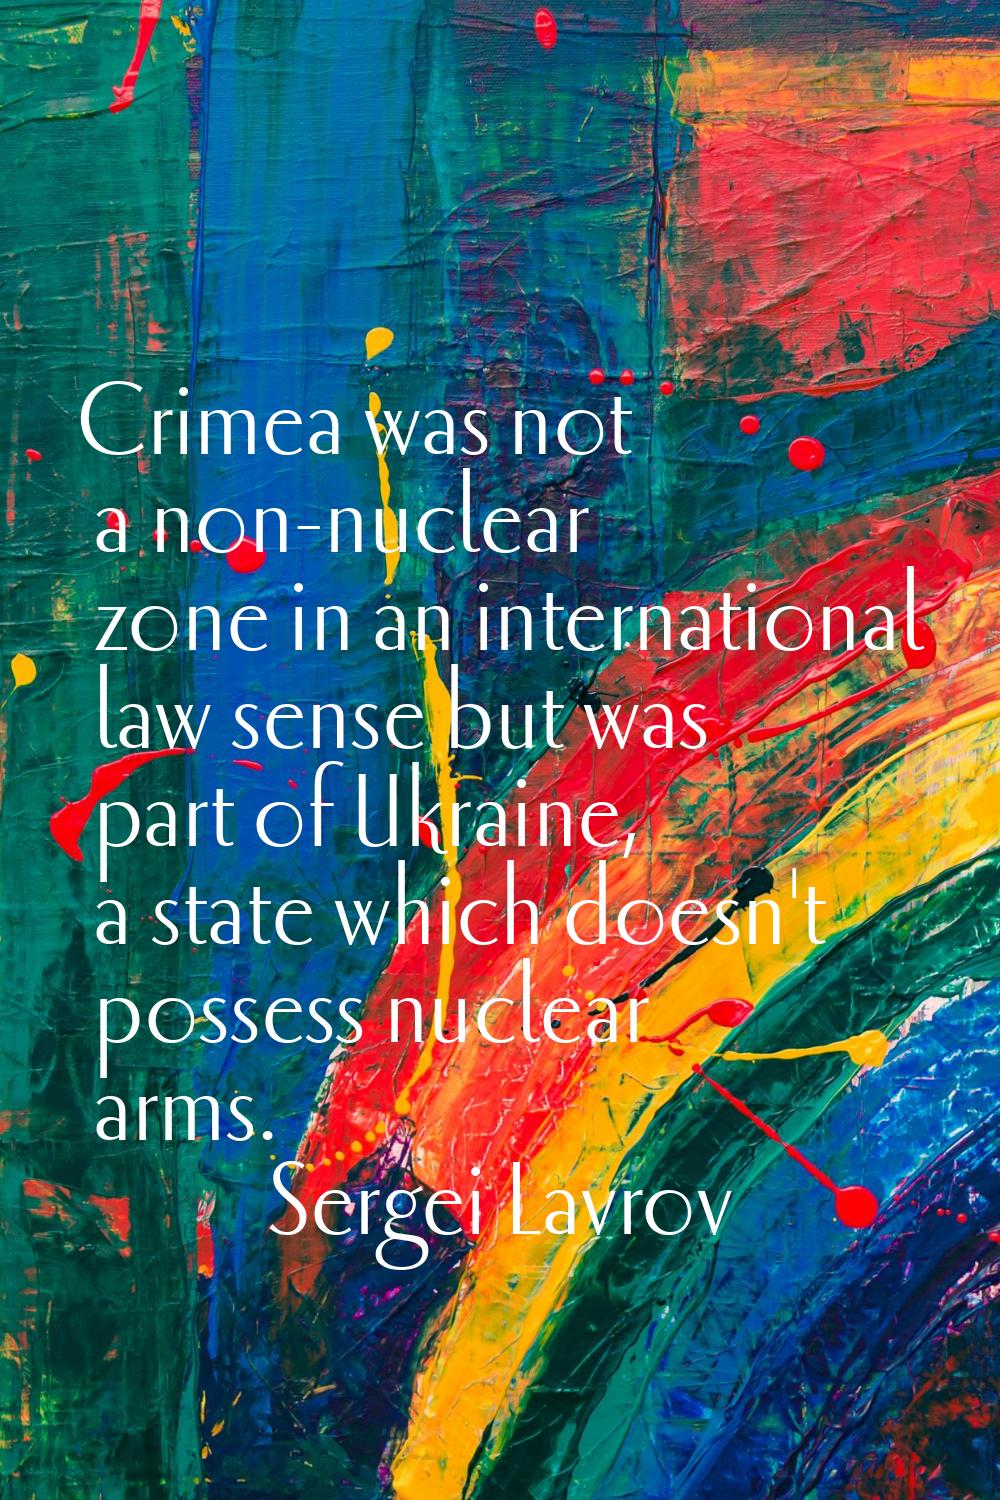 Crimea was not a non-nuclear zone in an international law sense but was part of Ukraine, a state wh